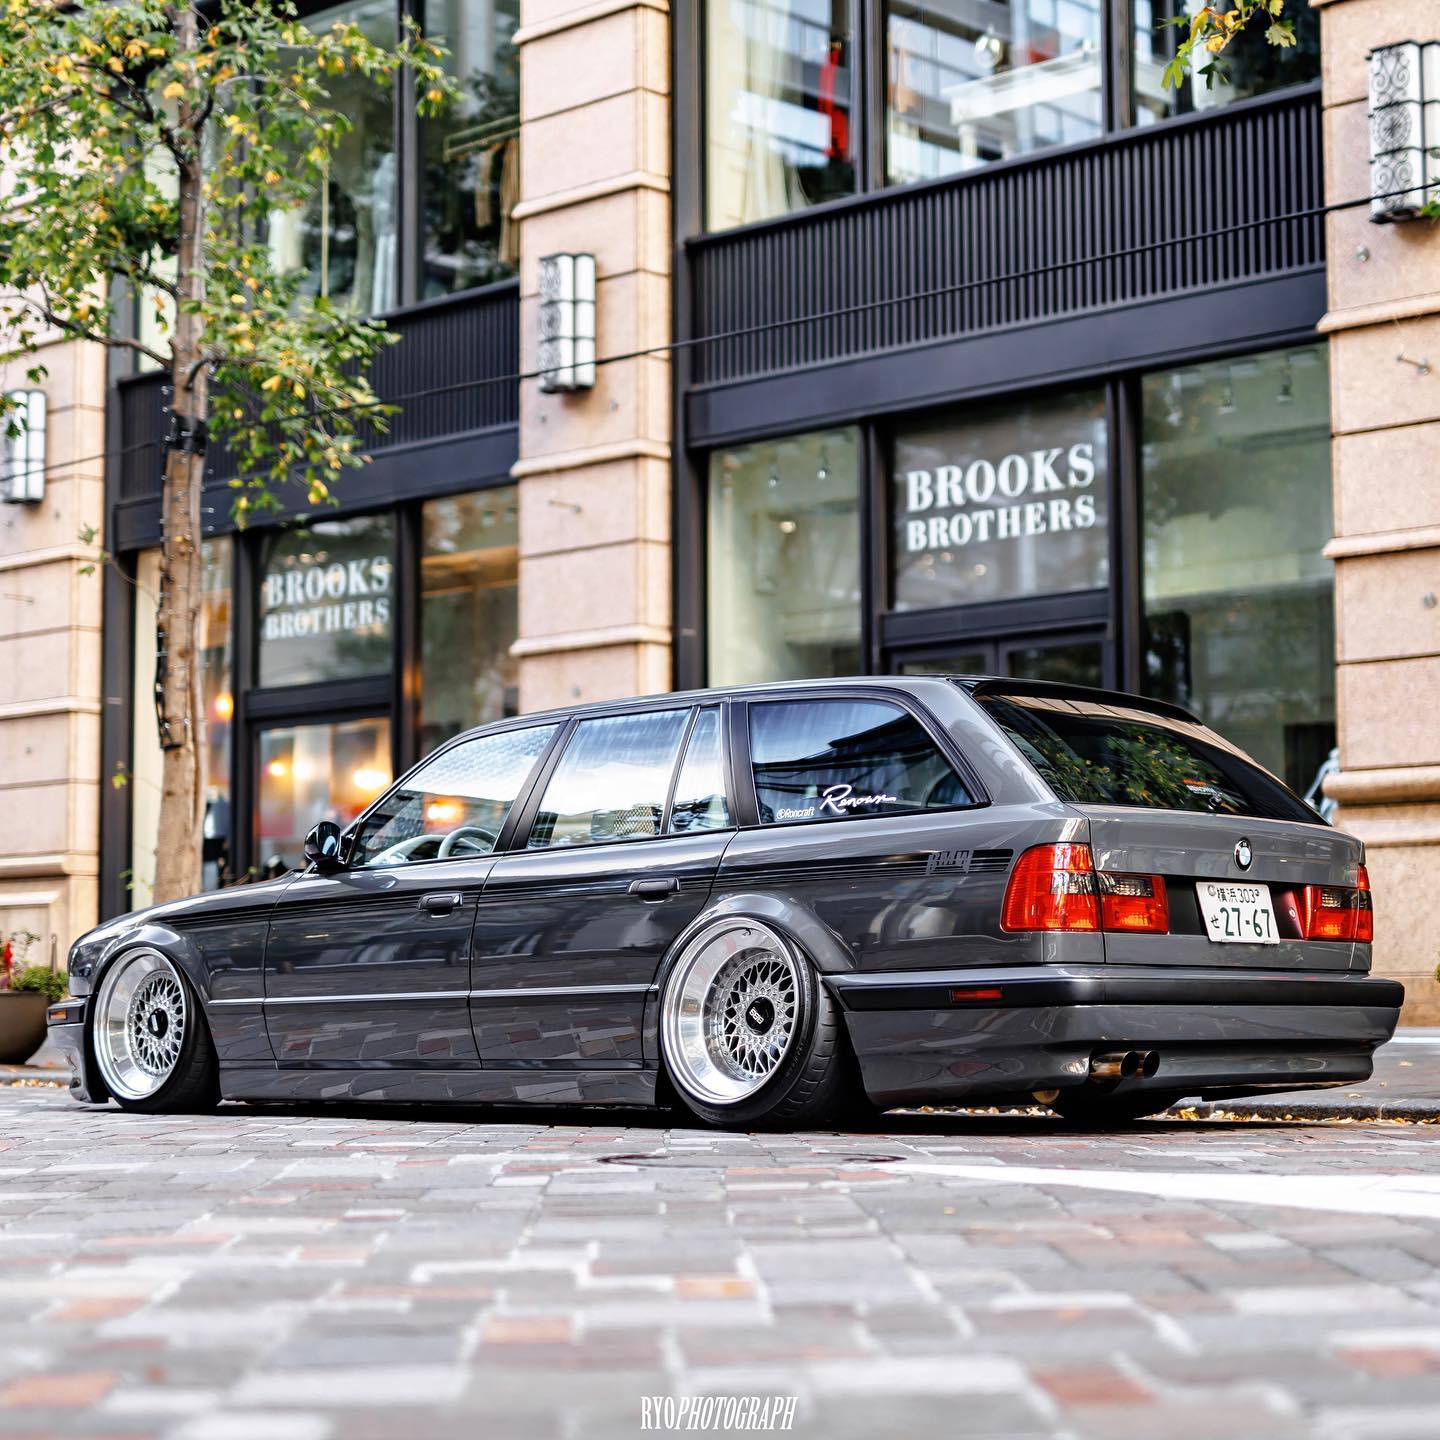 Slammed grey BMW E34 Touring with Airlift air suspension